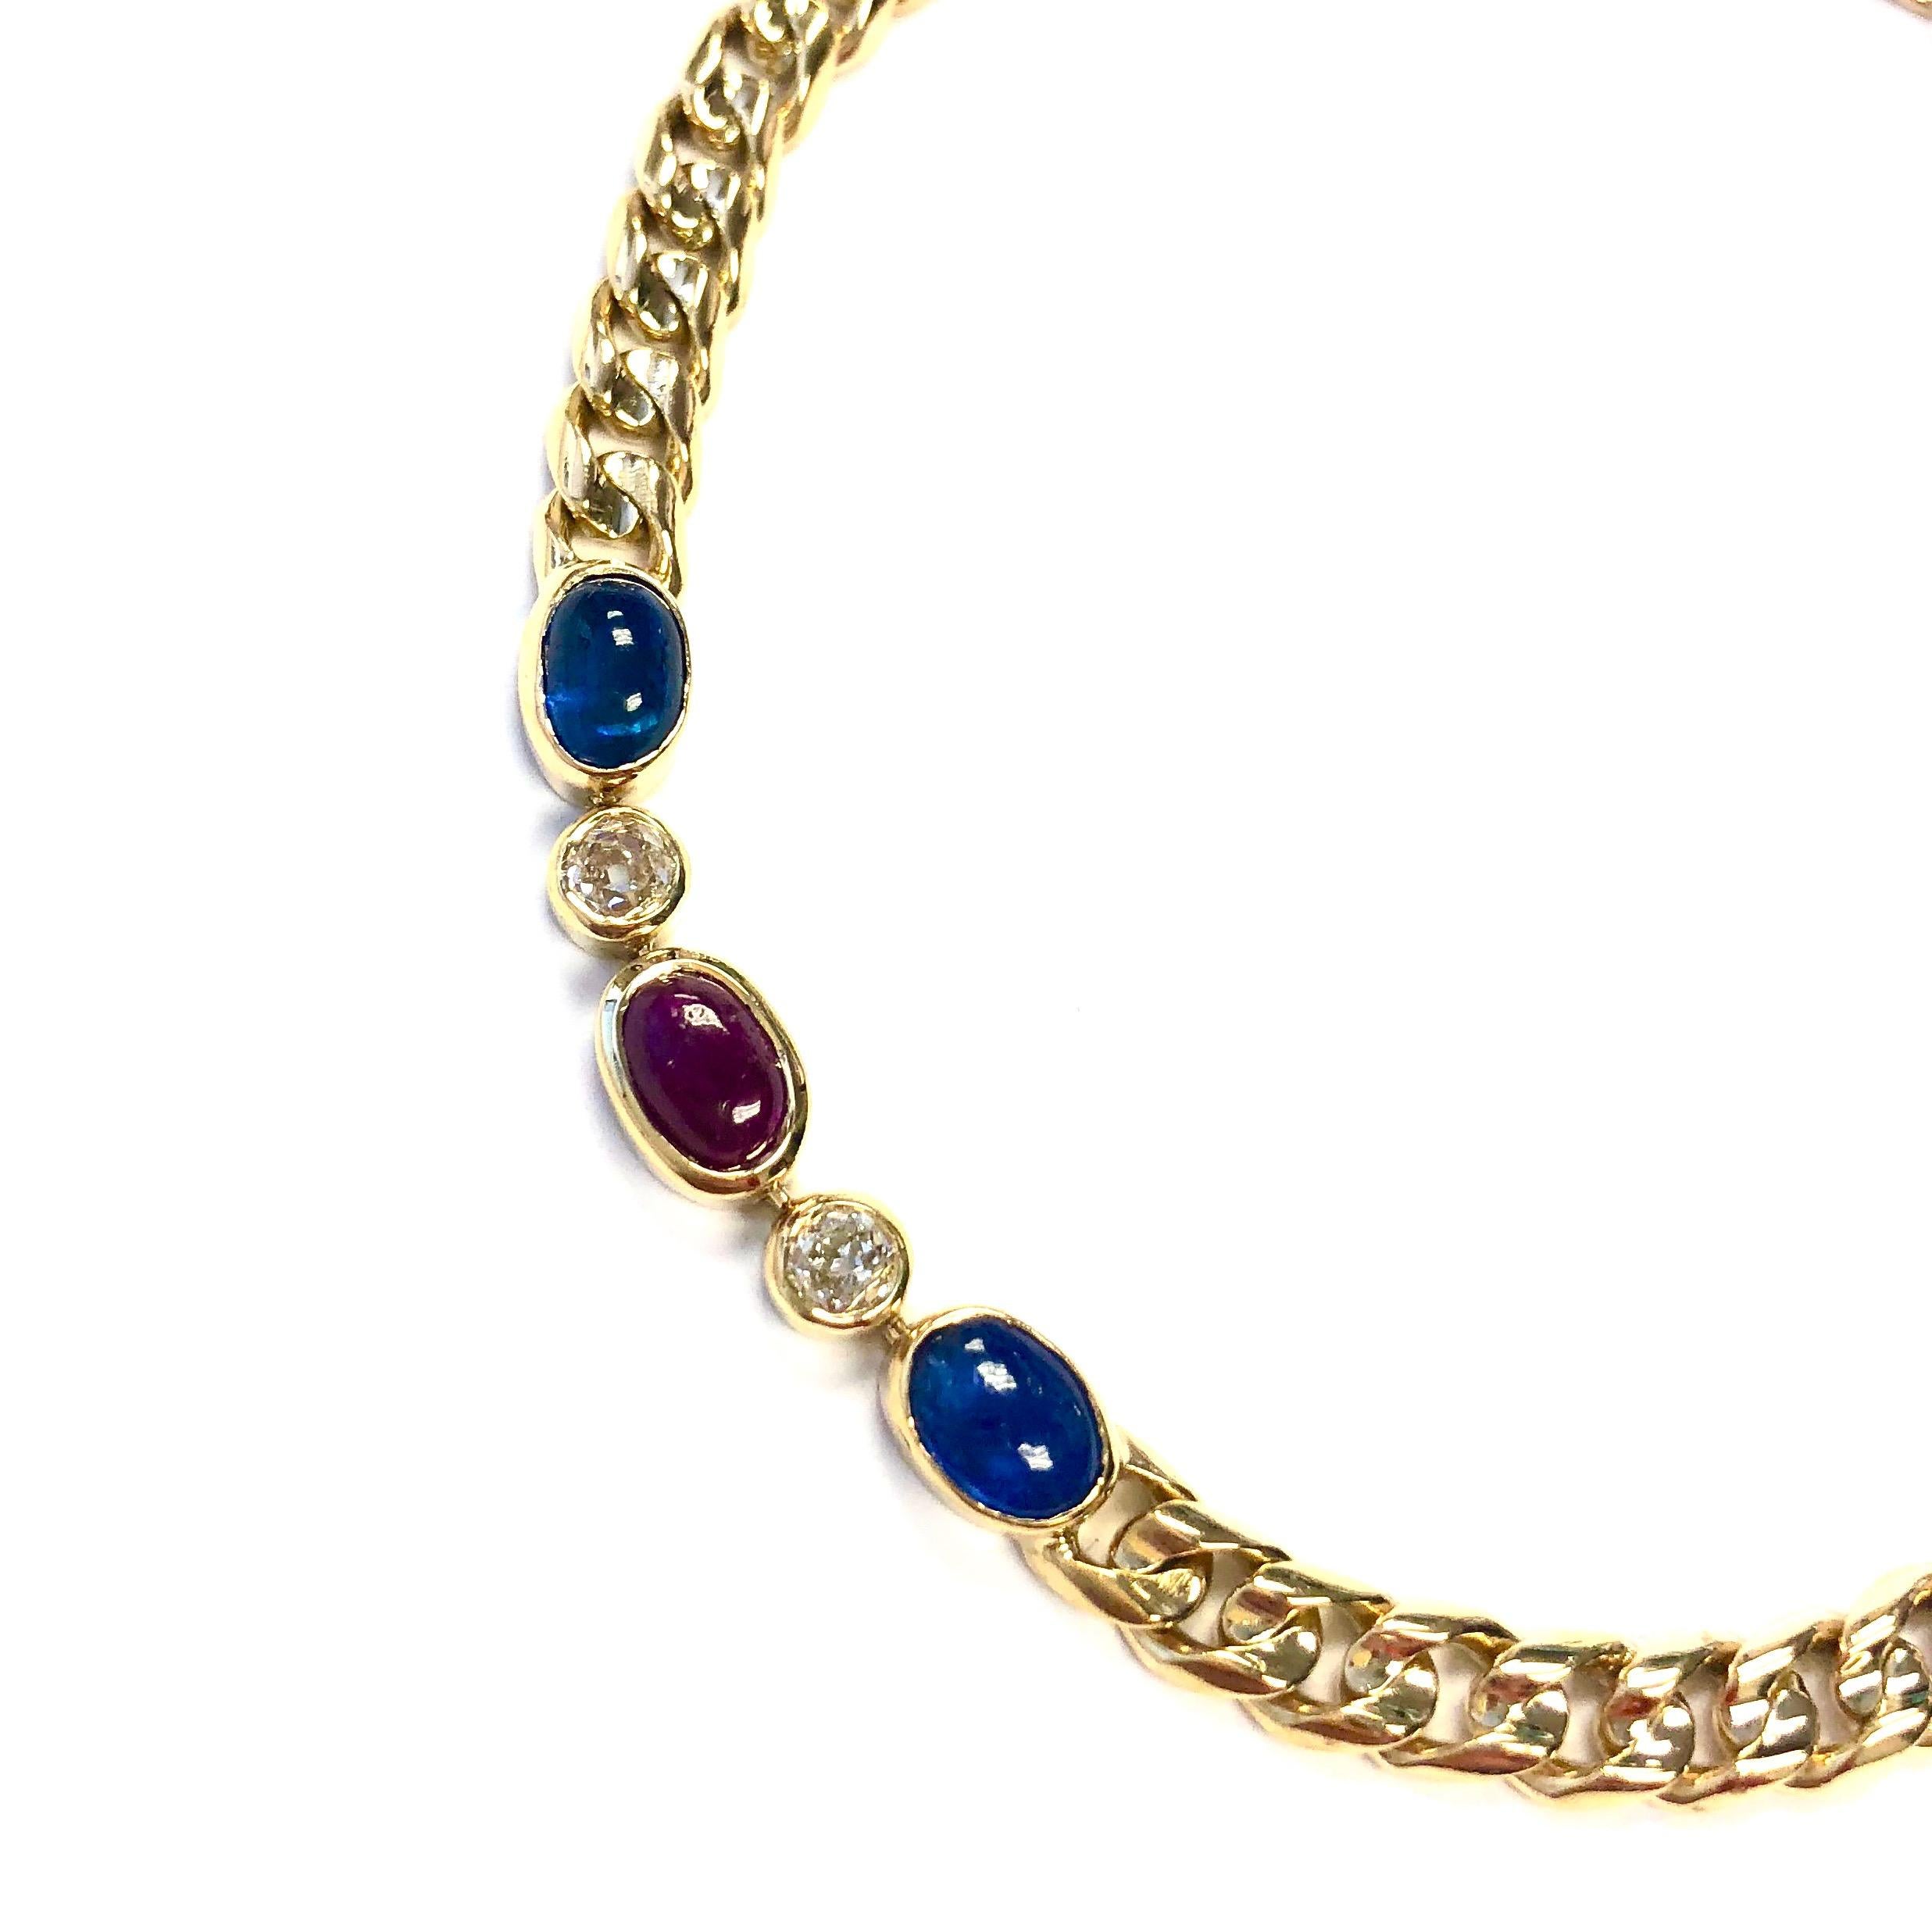 Antique French bracelet crafted in 18K yellow gold, featuring three sections of bezel set gemstones connected by gold curbed link chains. Each section has three oval cabochon cut rubies and sapphires with old mine cut diamondds in between them.